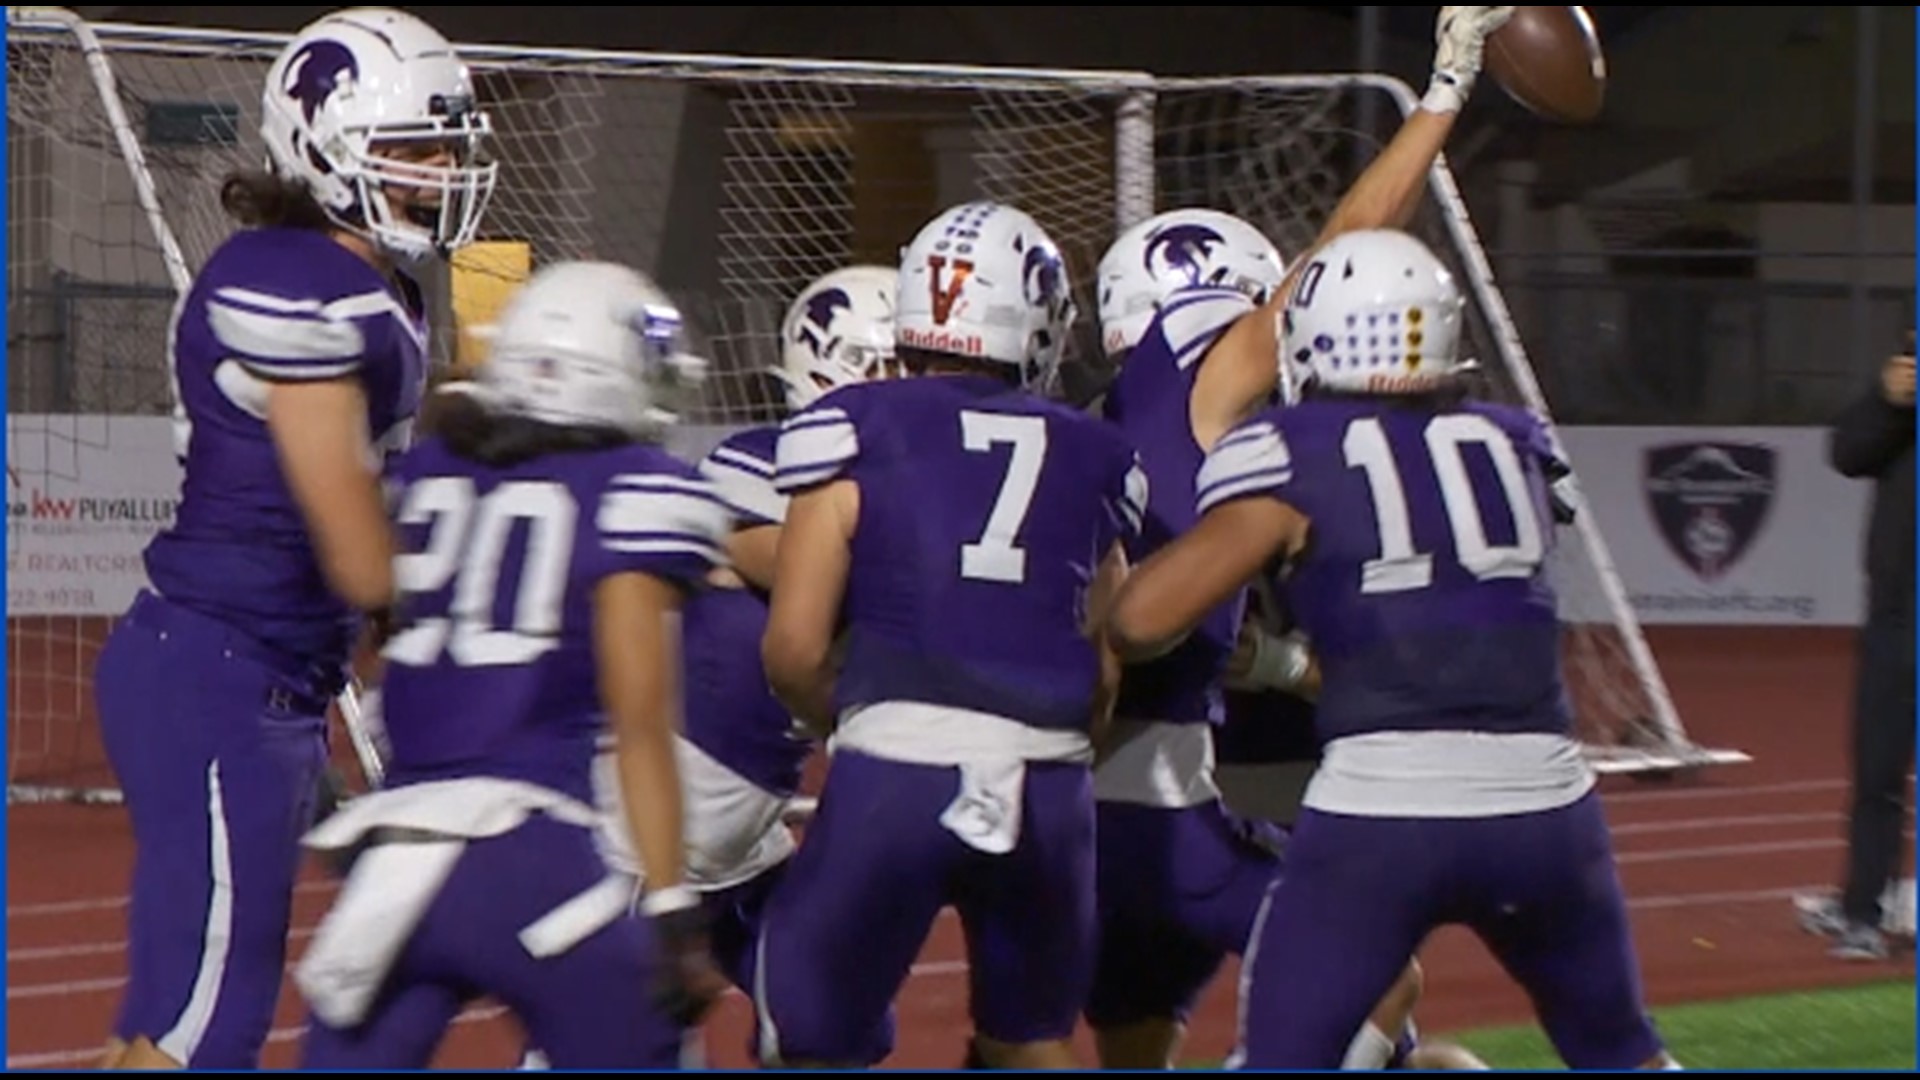 Highlights of Sumner's 35-30 win over Puyallup